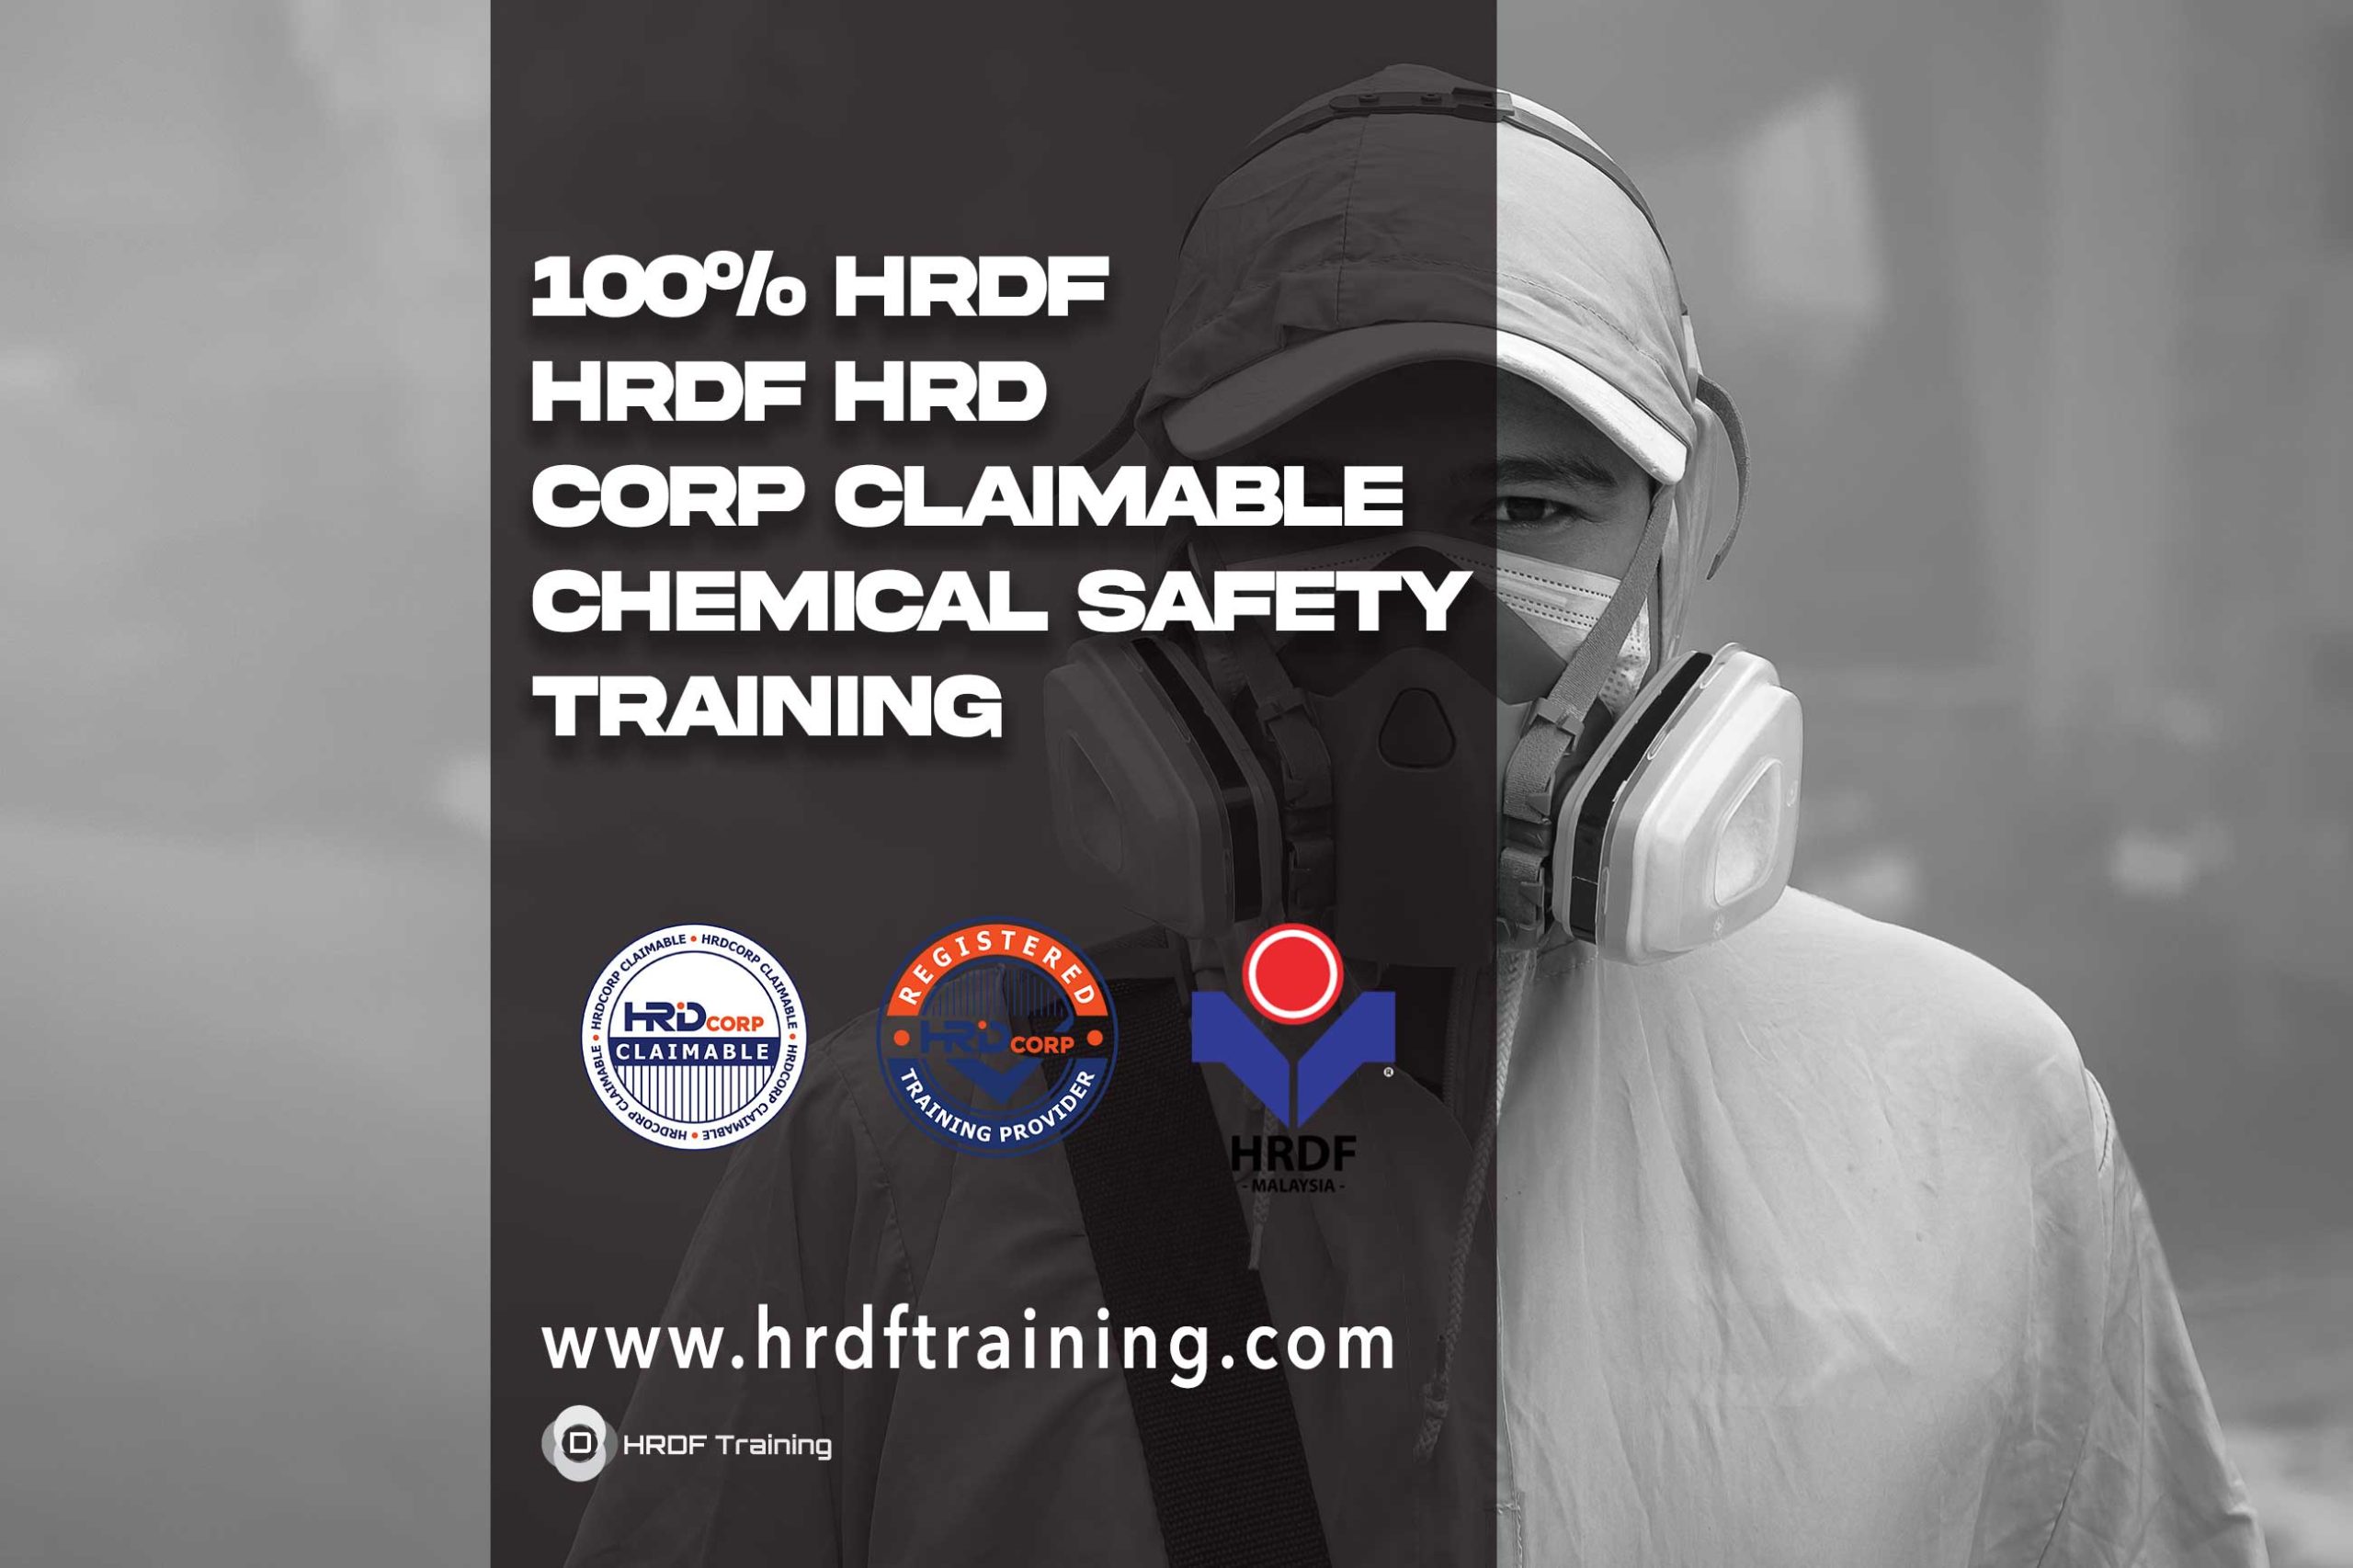 HRDF-HRD-Corp-Claimable-Chemical-Safety-Training